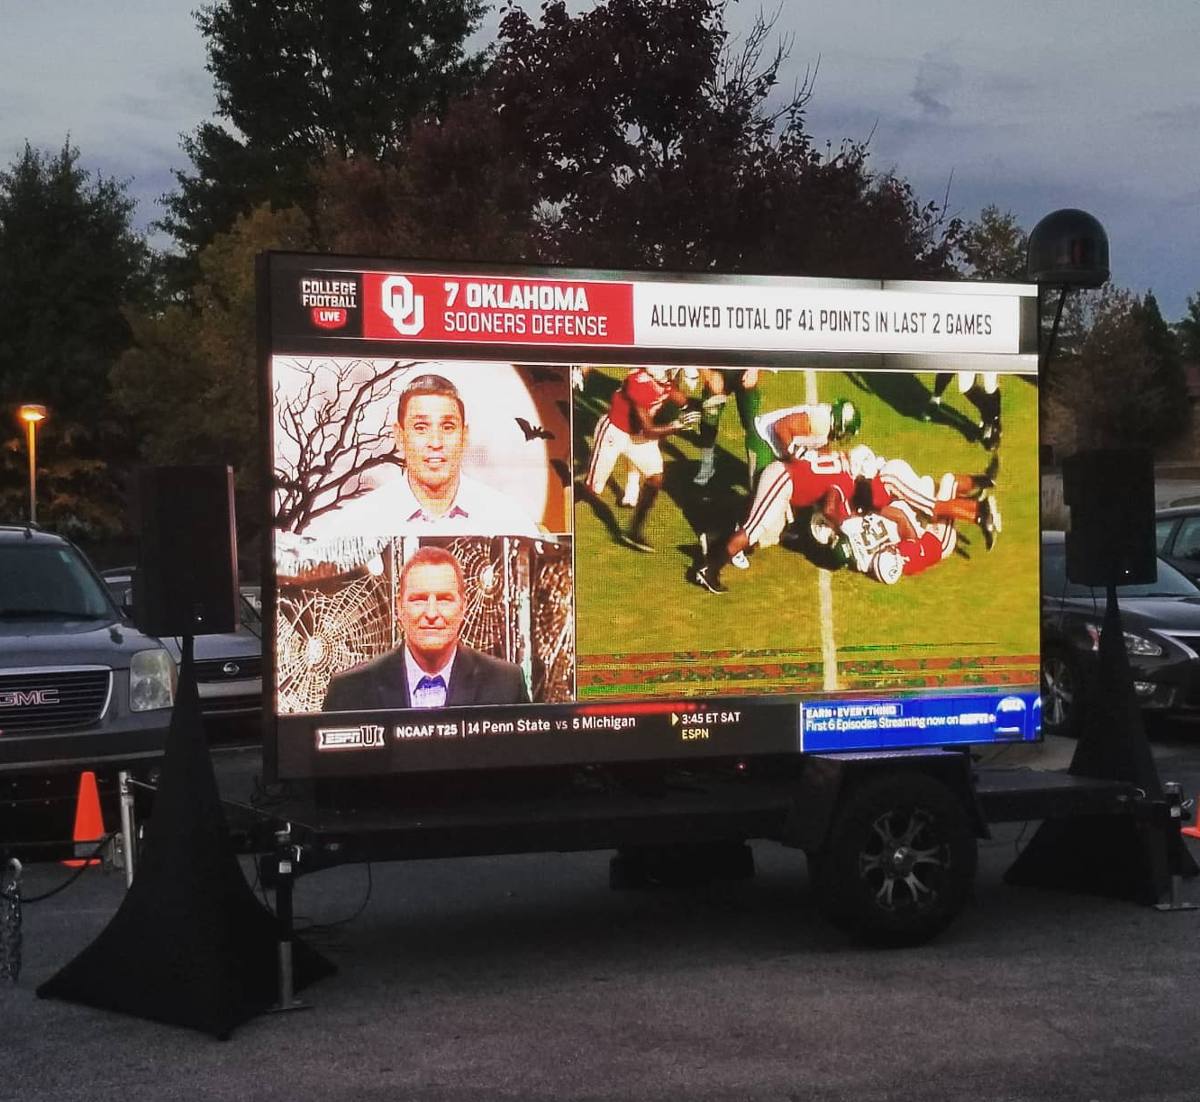 ESPN broadcast on event LED screen